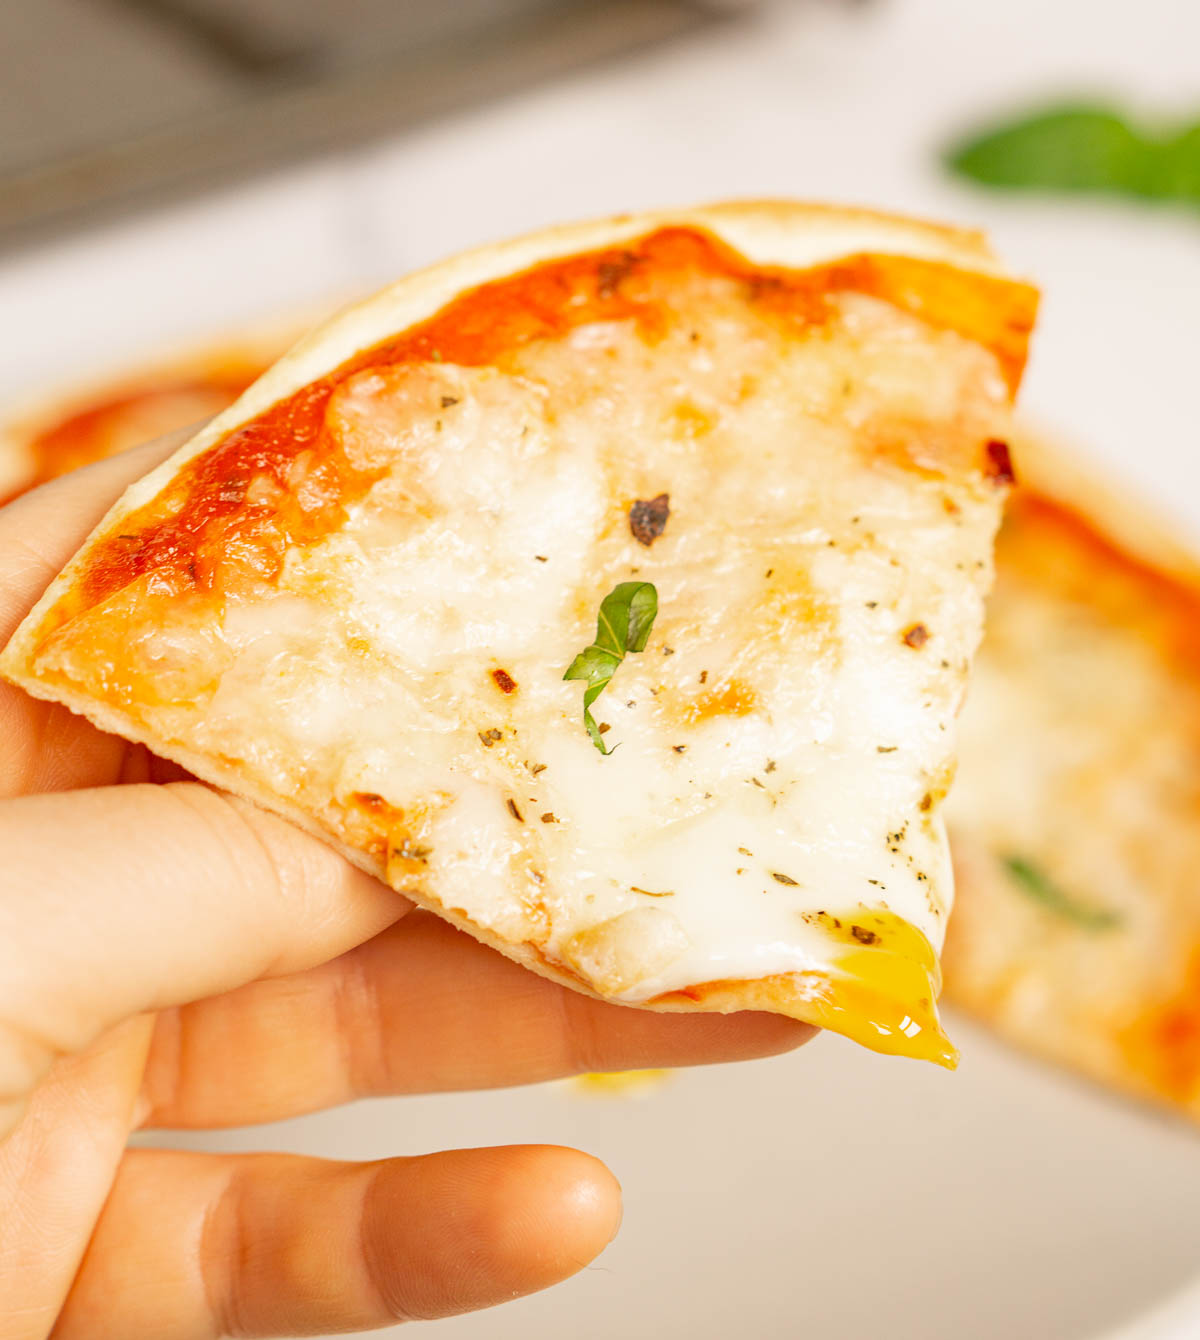 Hand holding slice of tortilla pizza with egg